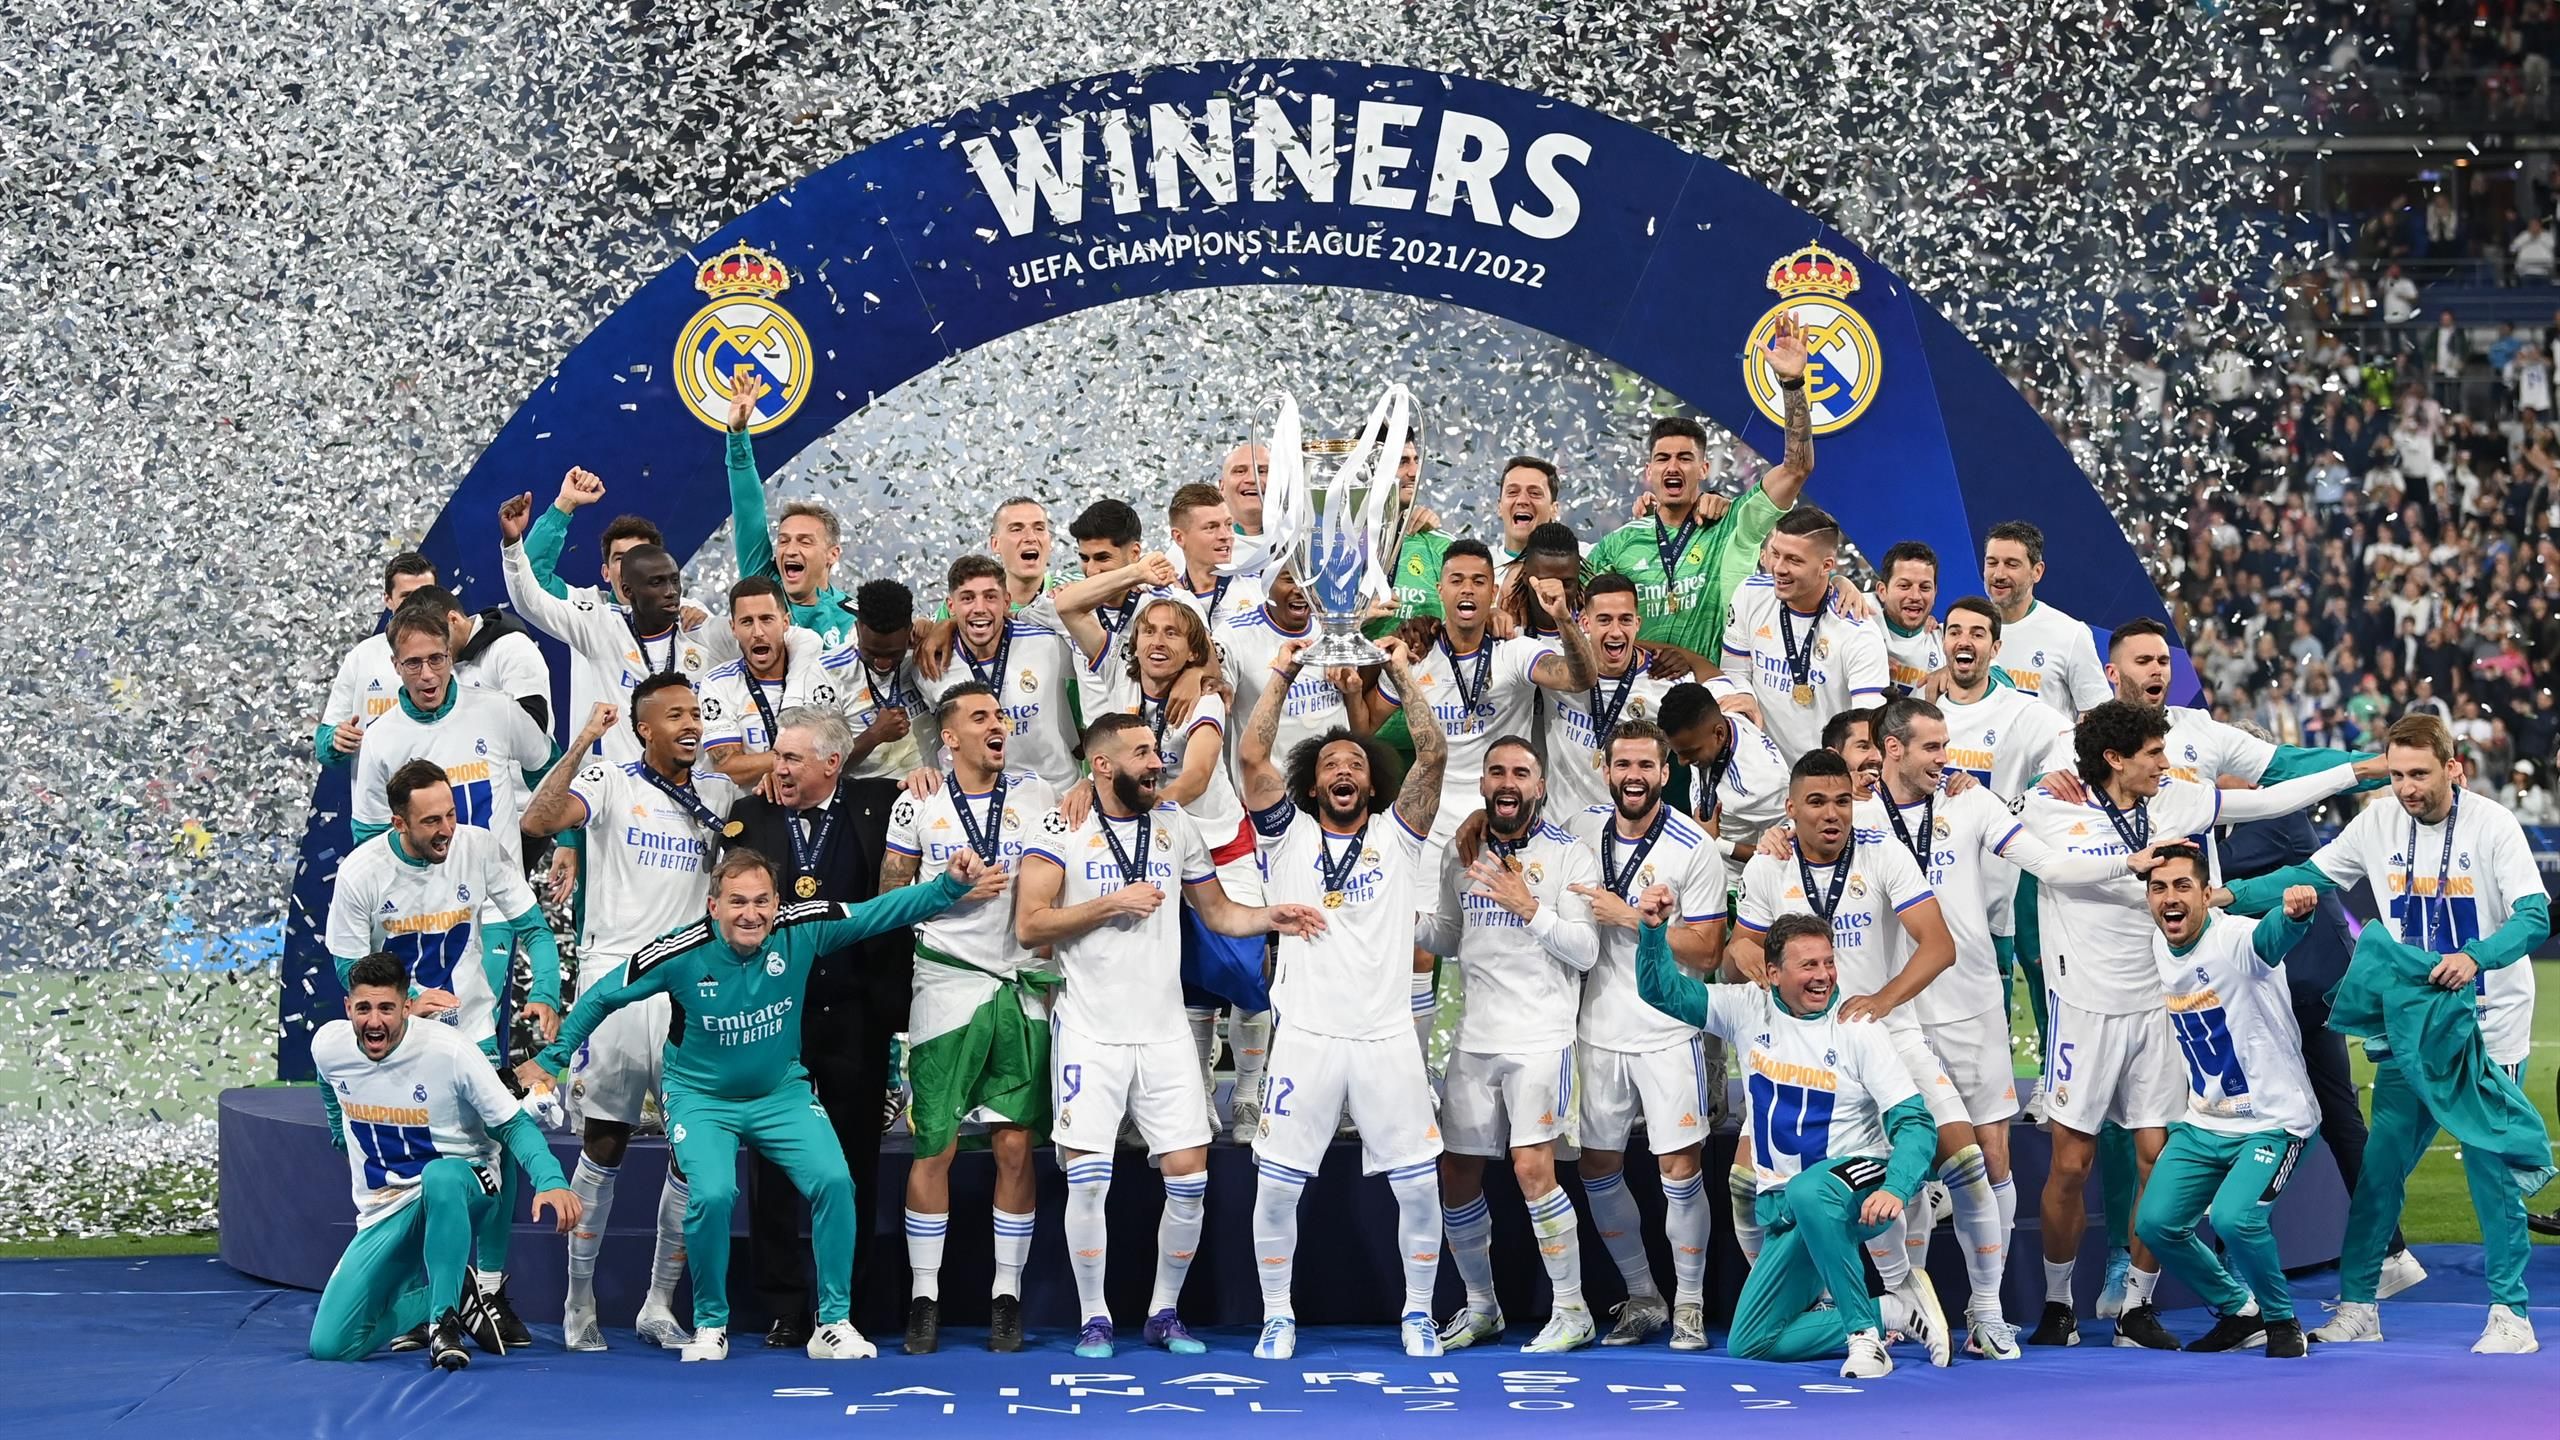 Real Madrid Kings of Europe once more as Thibaut Courtois and Vinicius Jr  star and see off Liverpool - Eurosport